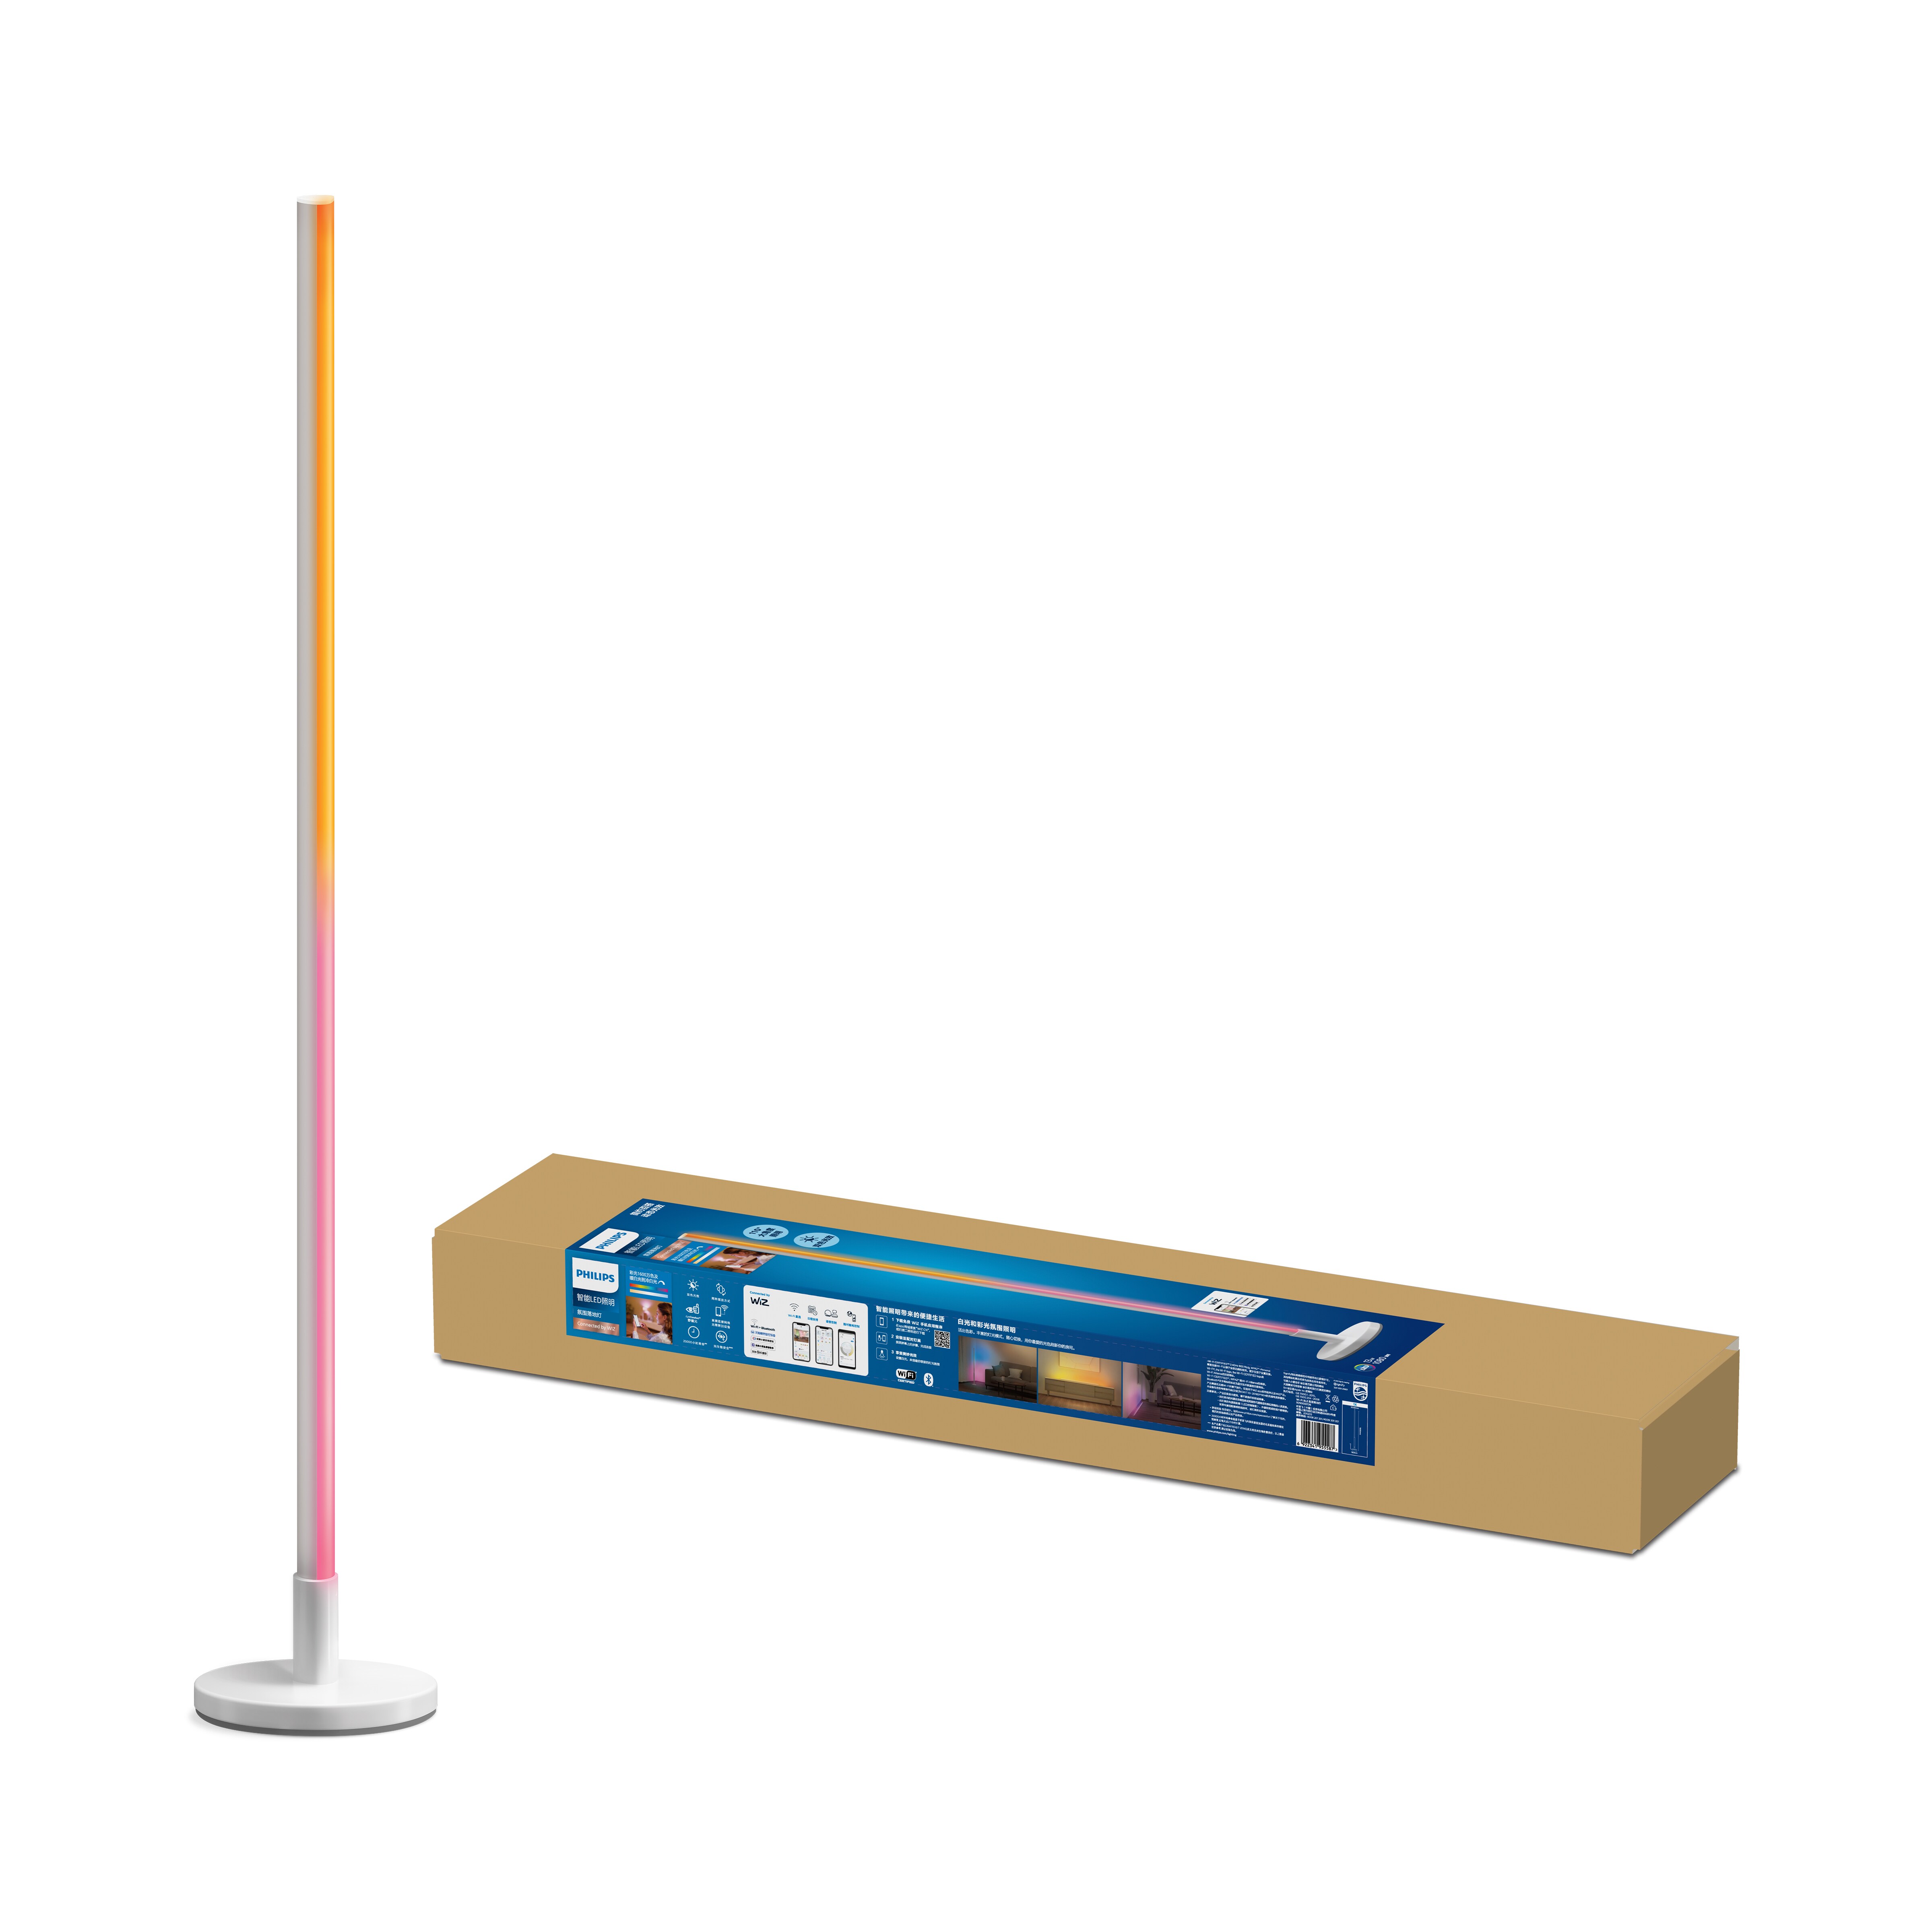 WiZ Pole Stehleuchte Tunable White & Color 1080lm Einzelpack ++ Cyberport